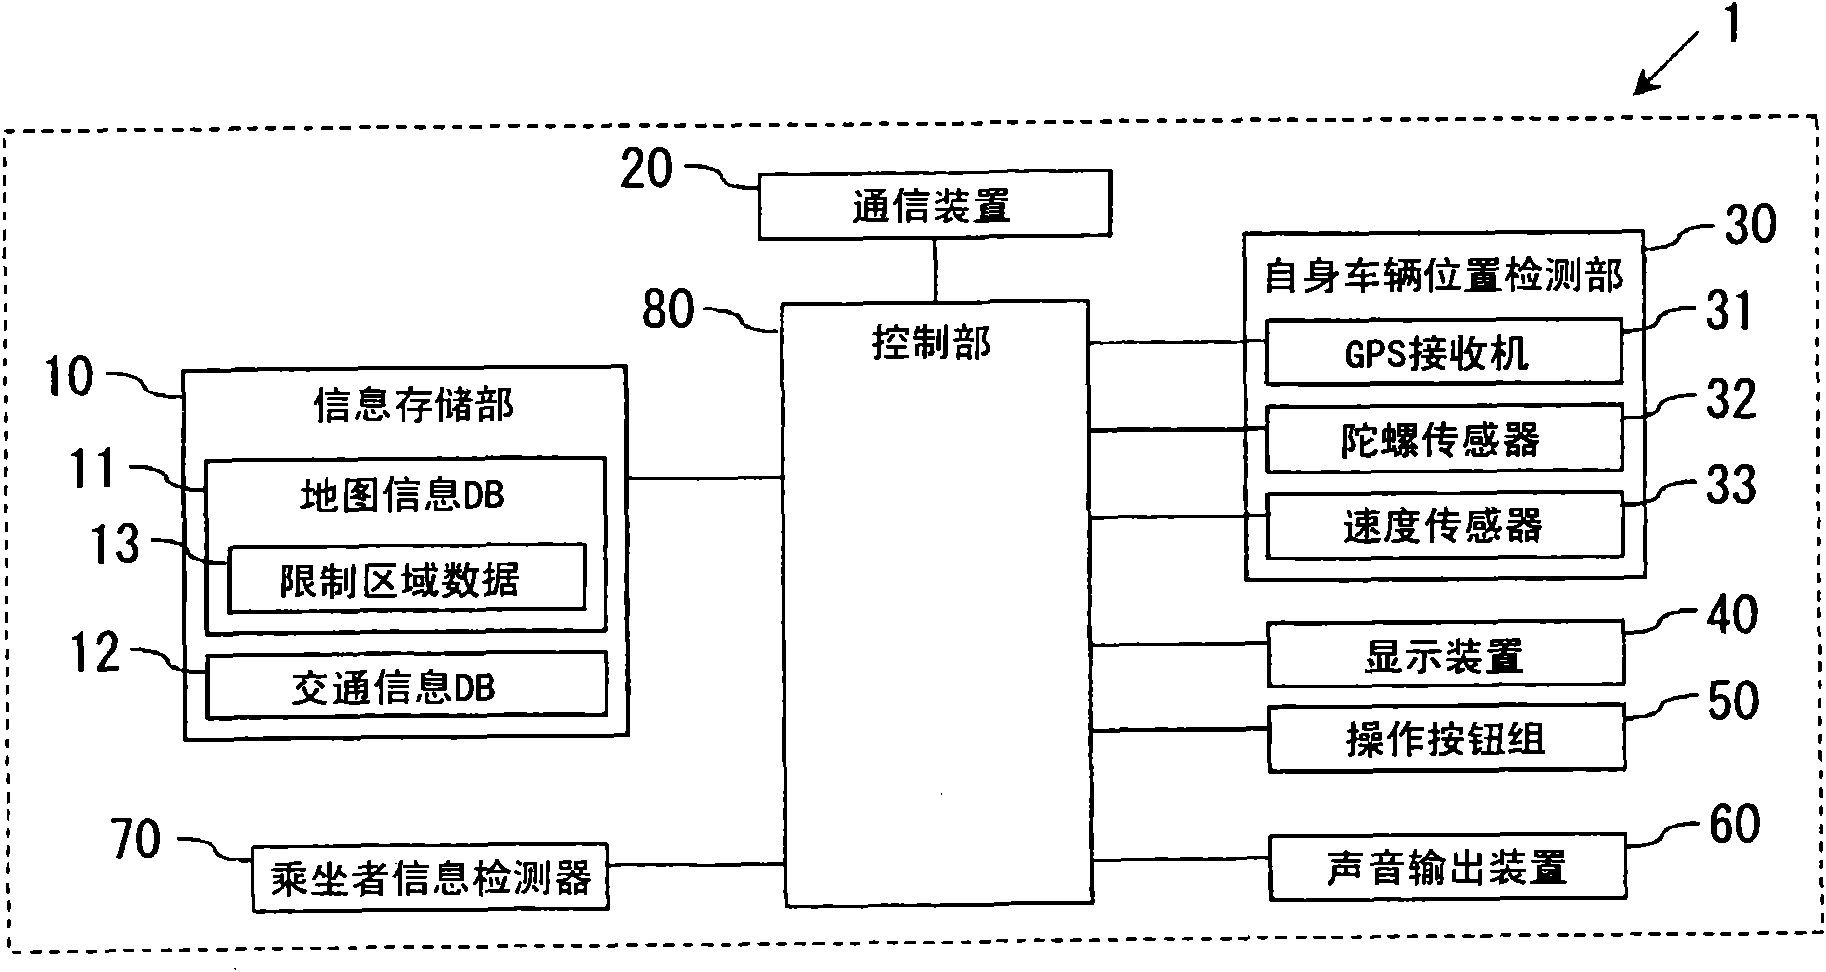 Navigation device and path searching method